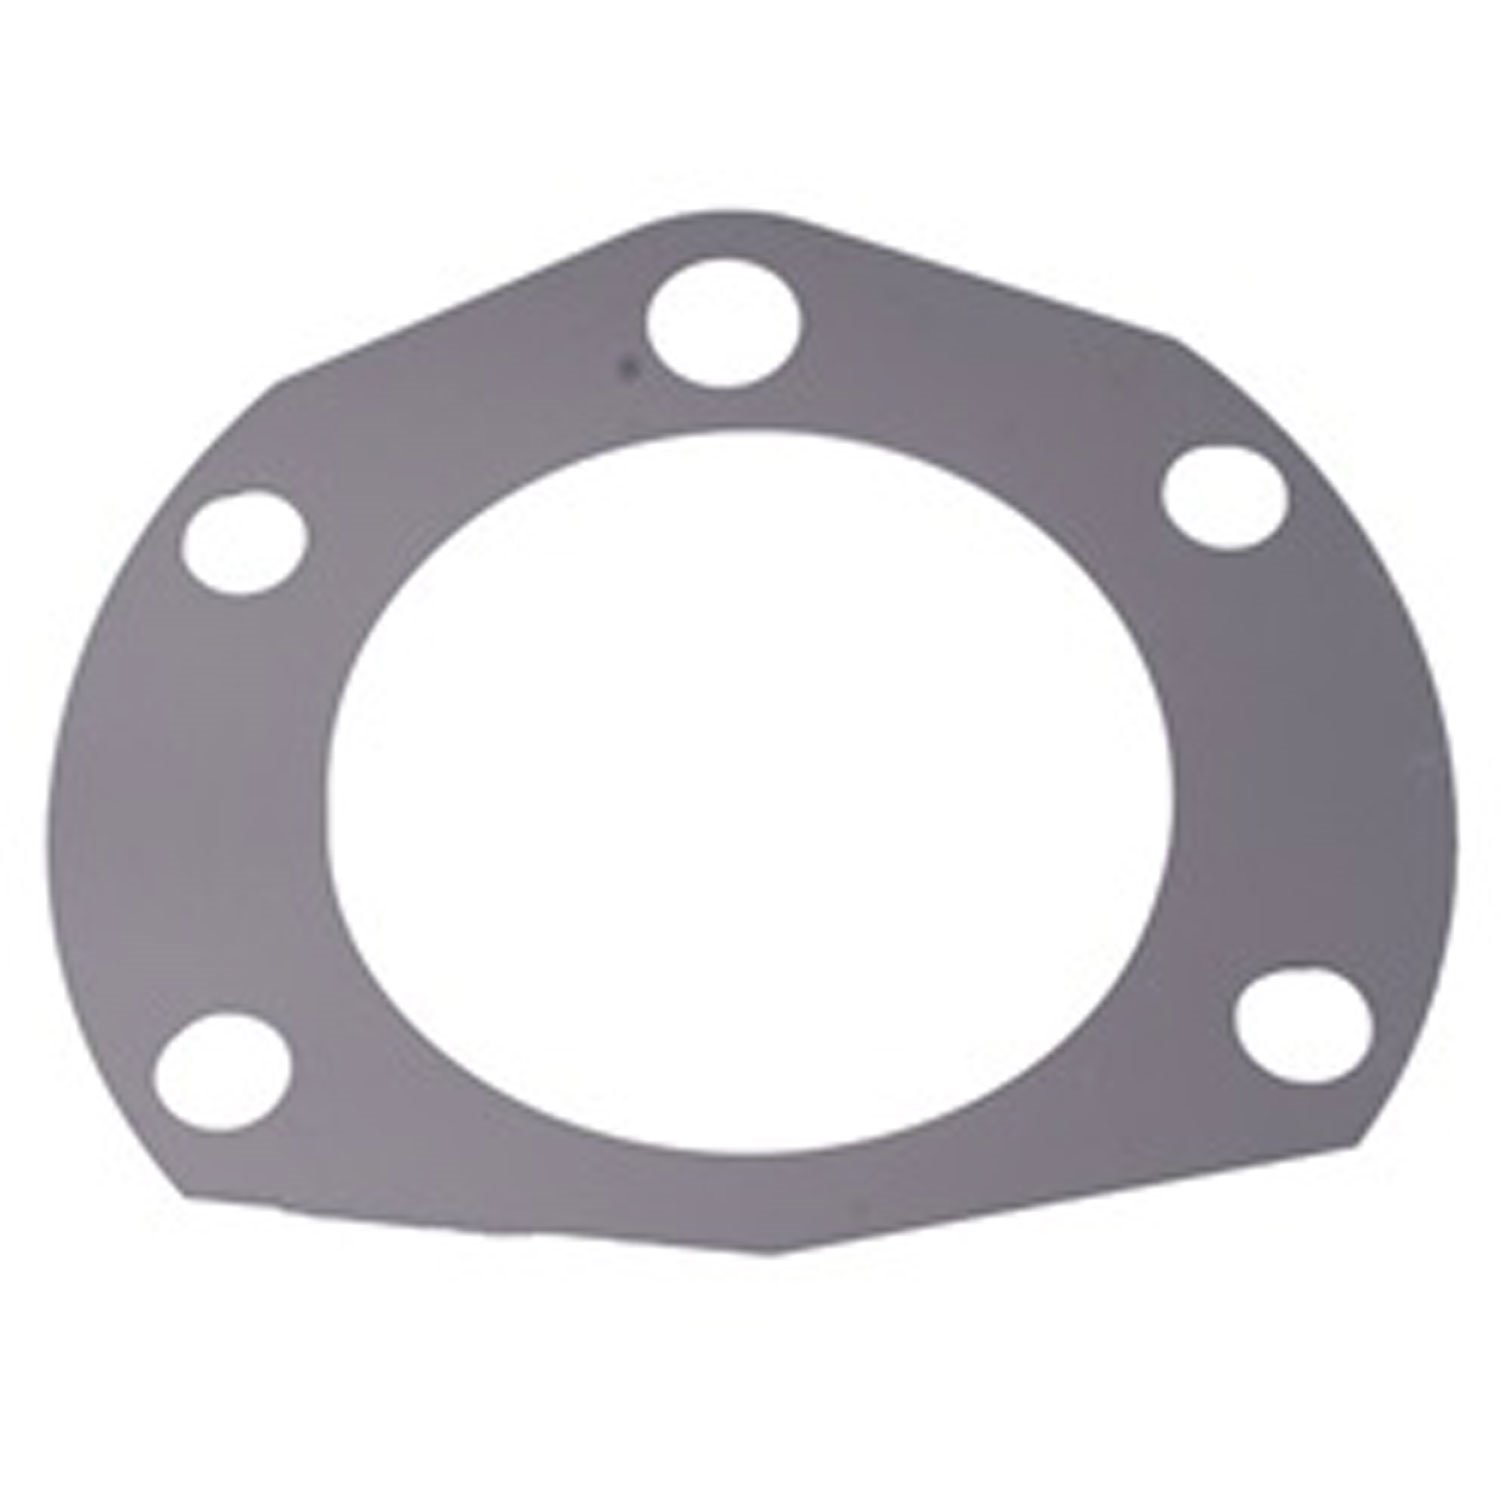 This 0.0003 inch axle bearing retainer shim from Omix-ADA fits the AMC 20 rear axle found in 76-86 Jeep CJ models.